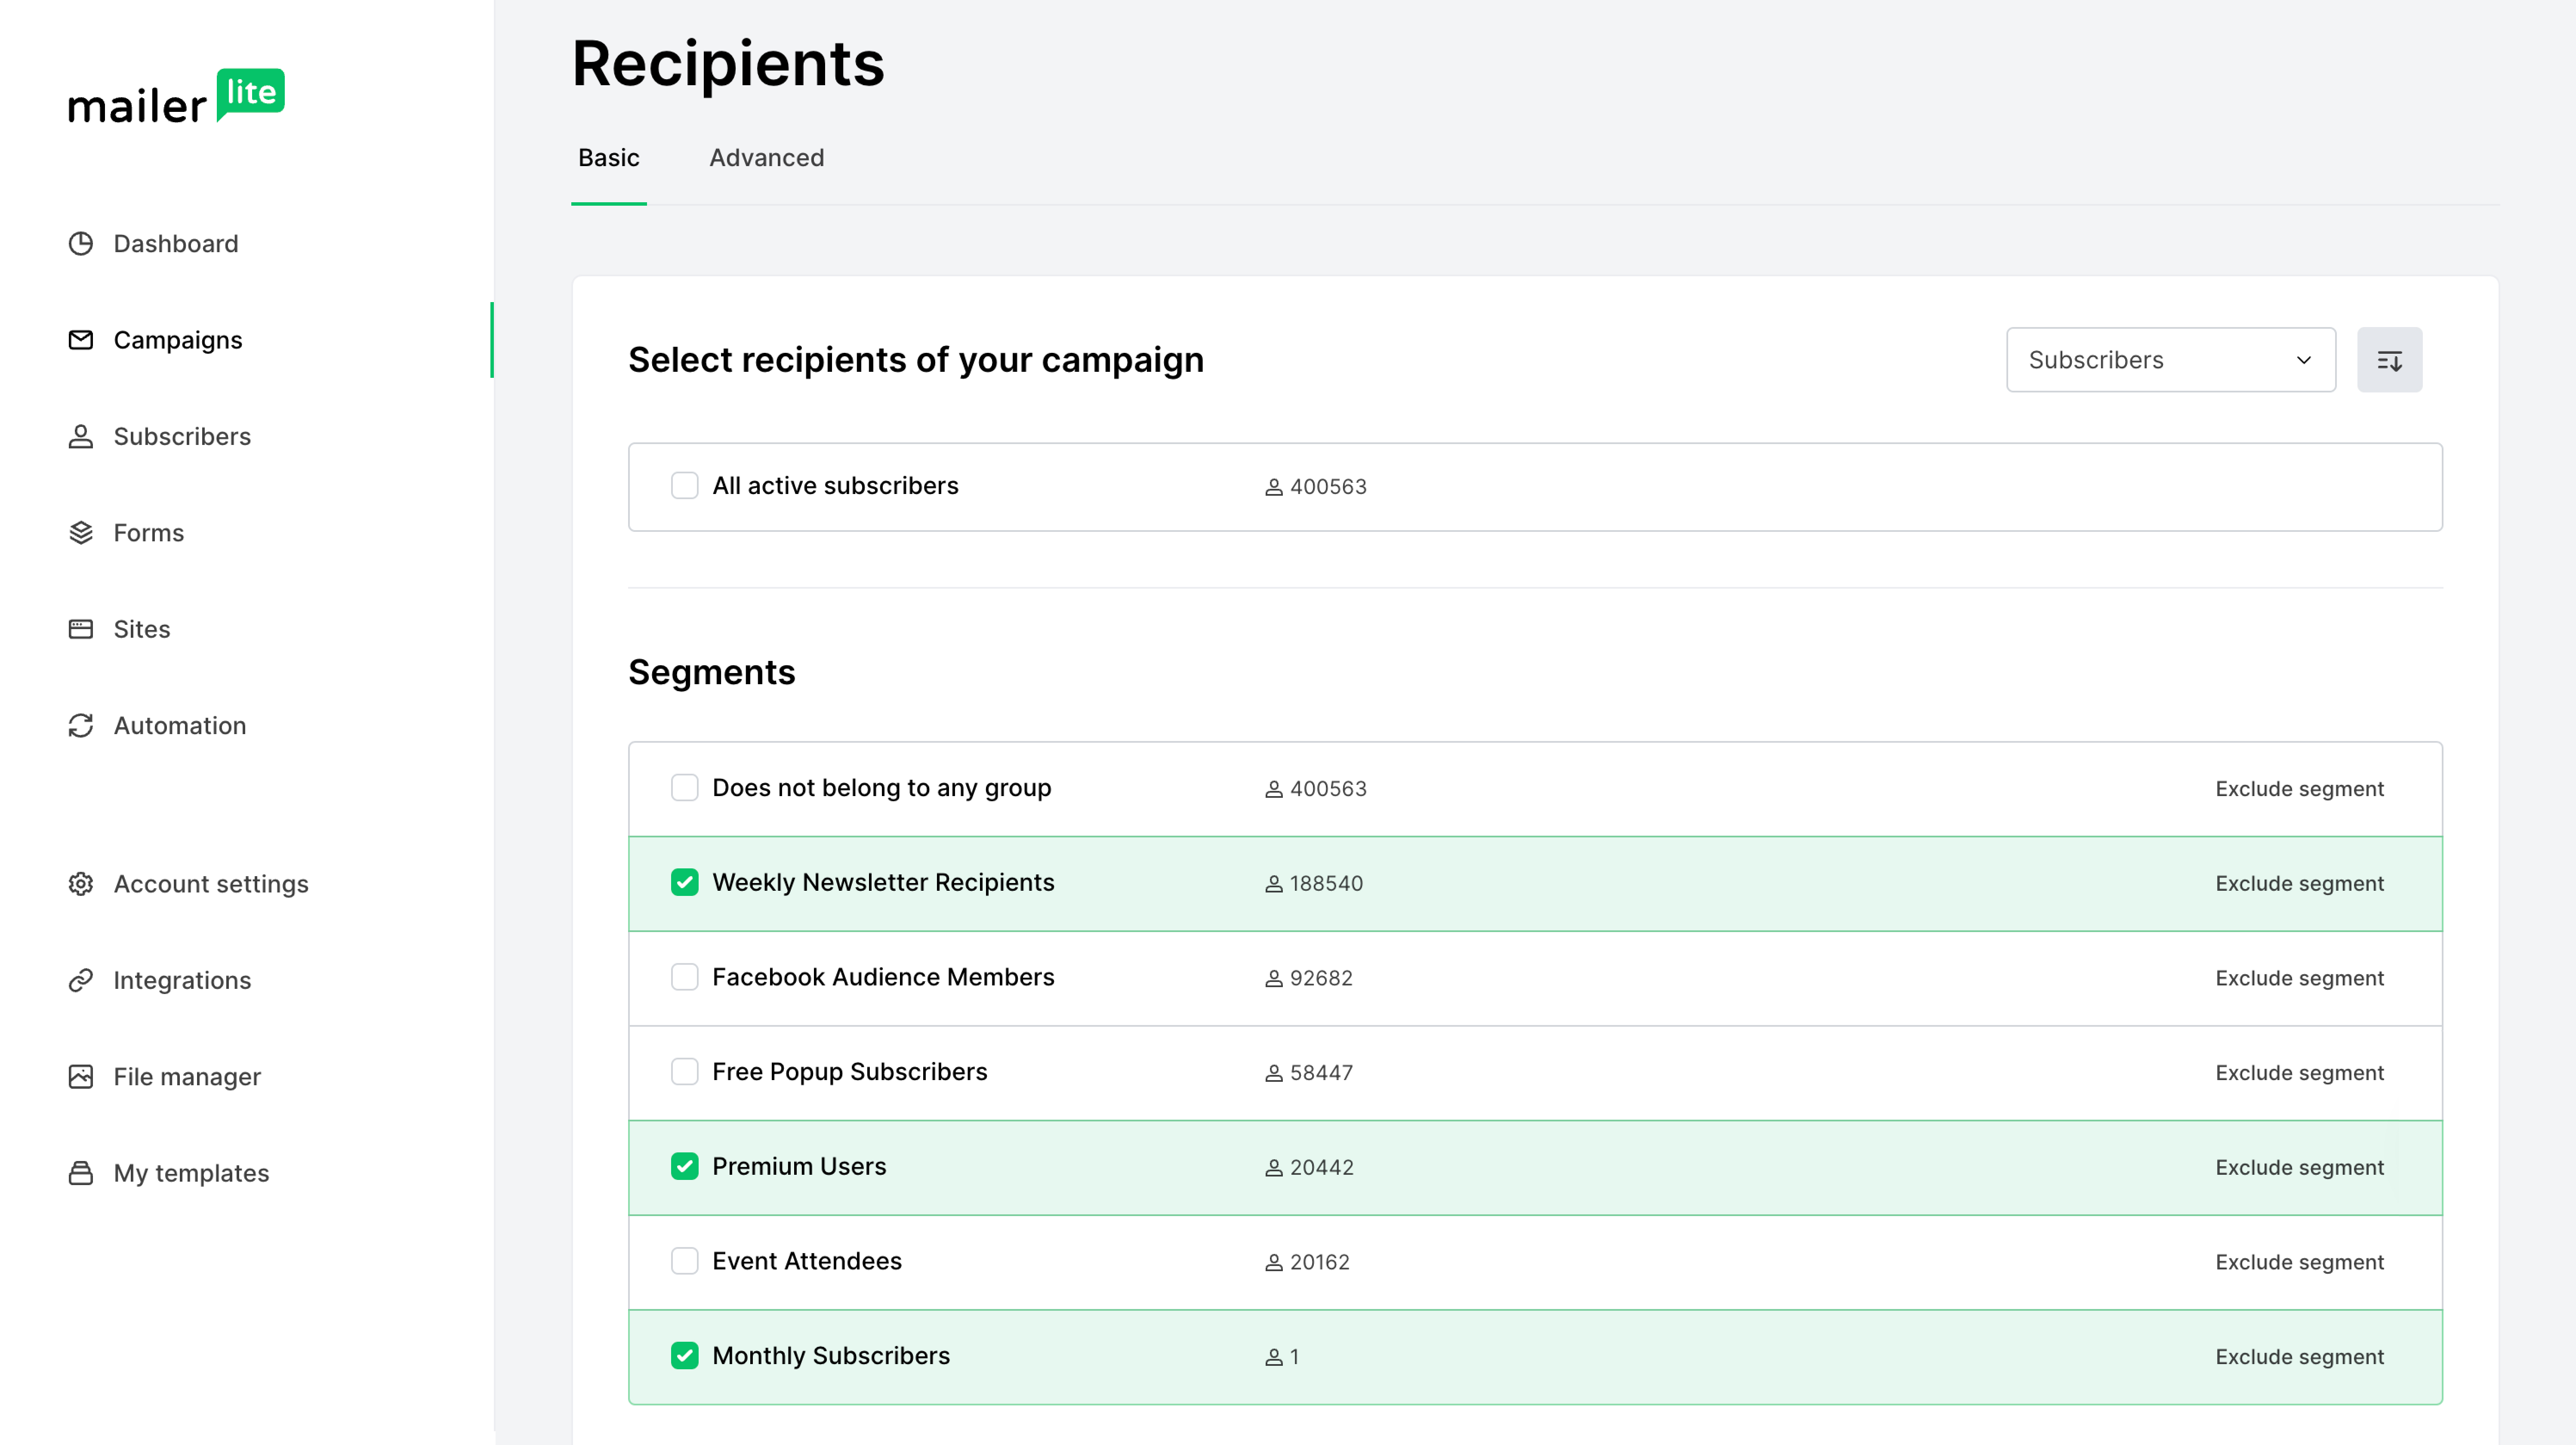 Screenshot of recipients page with different groups selected and excluded